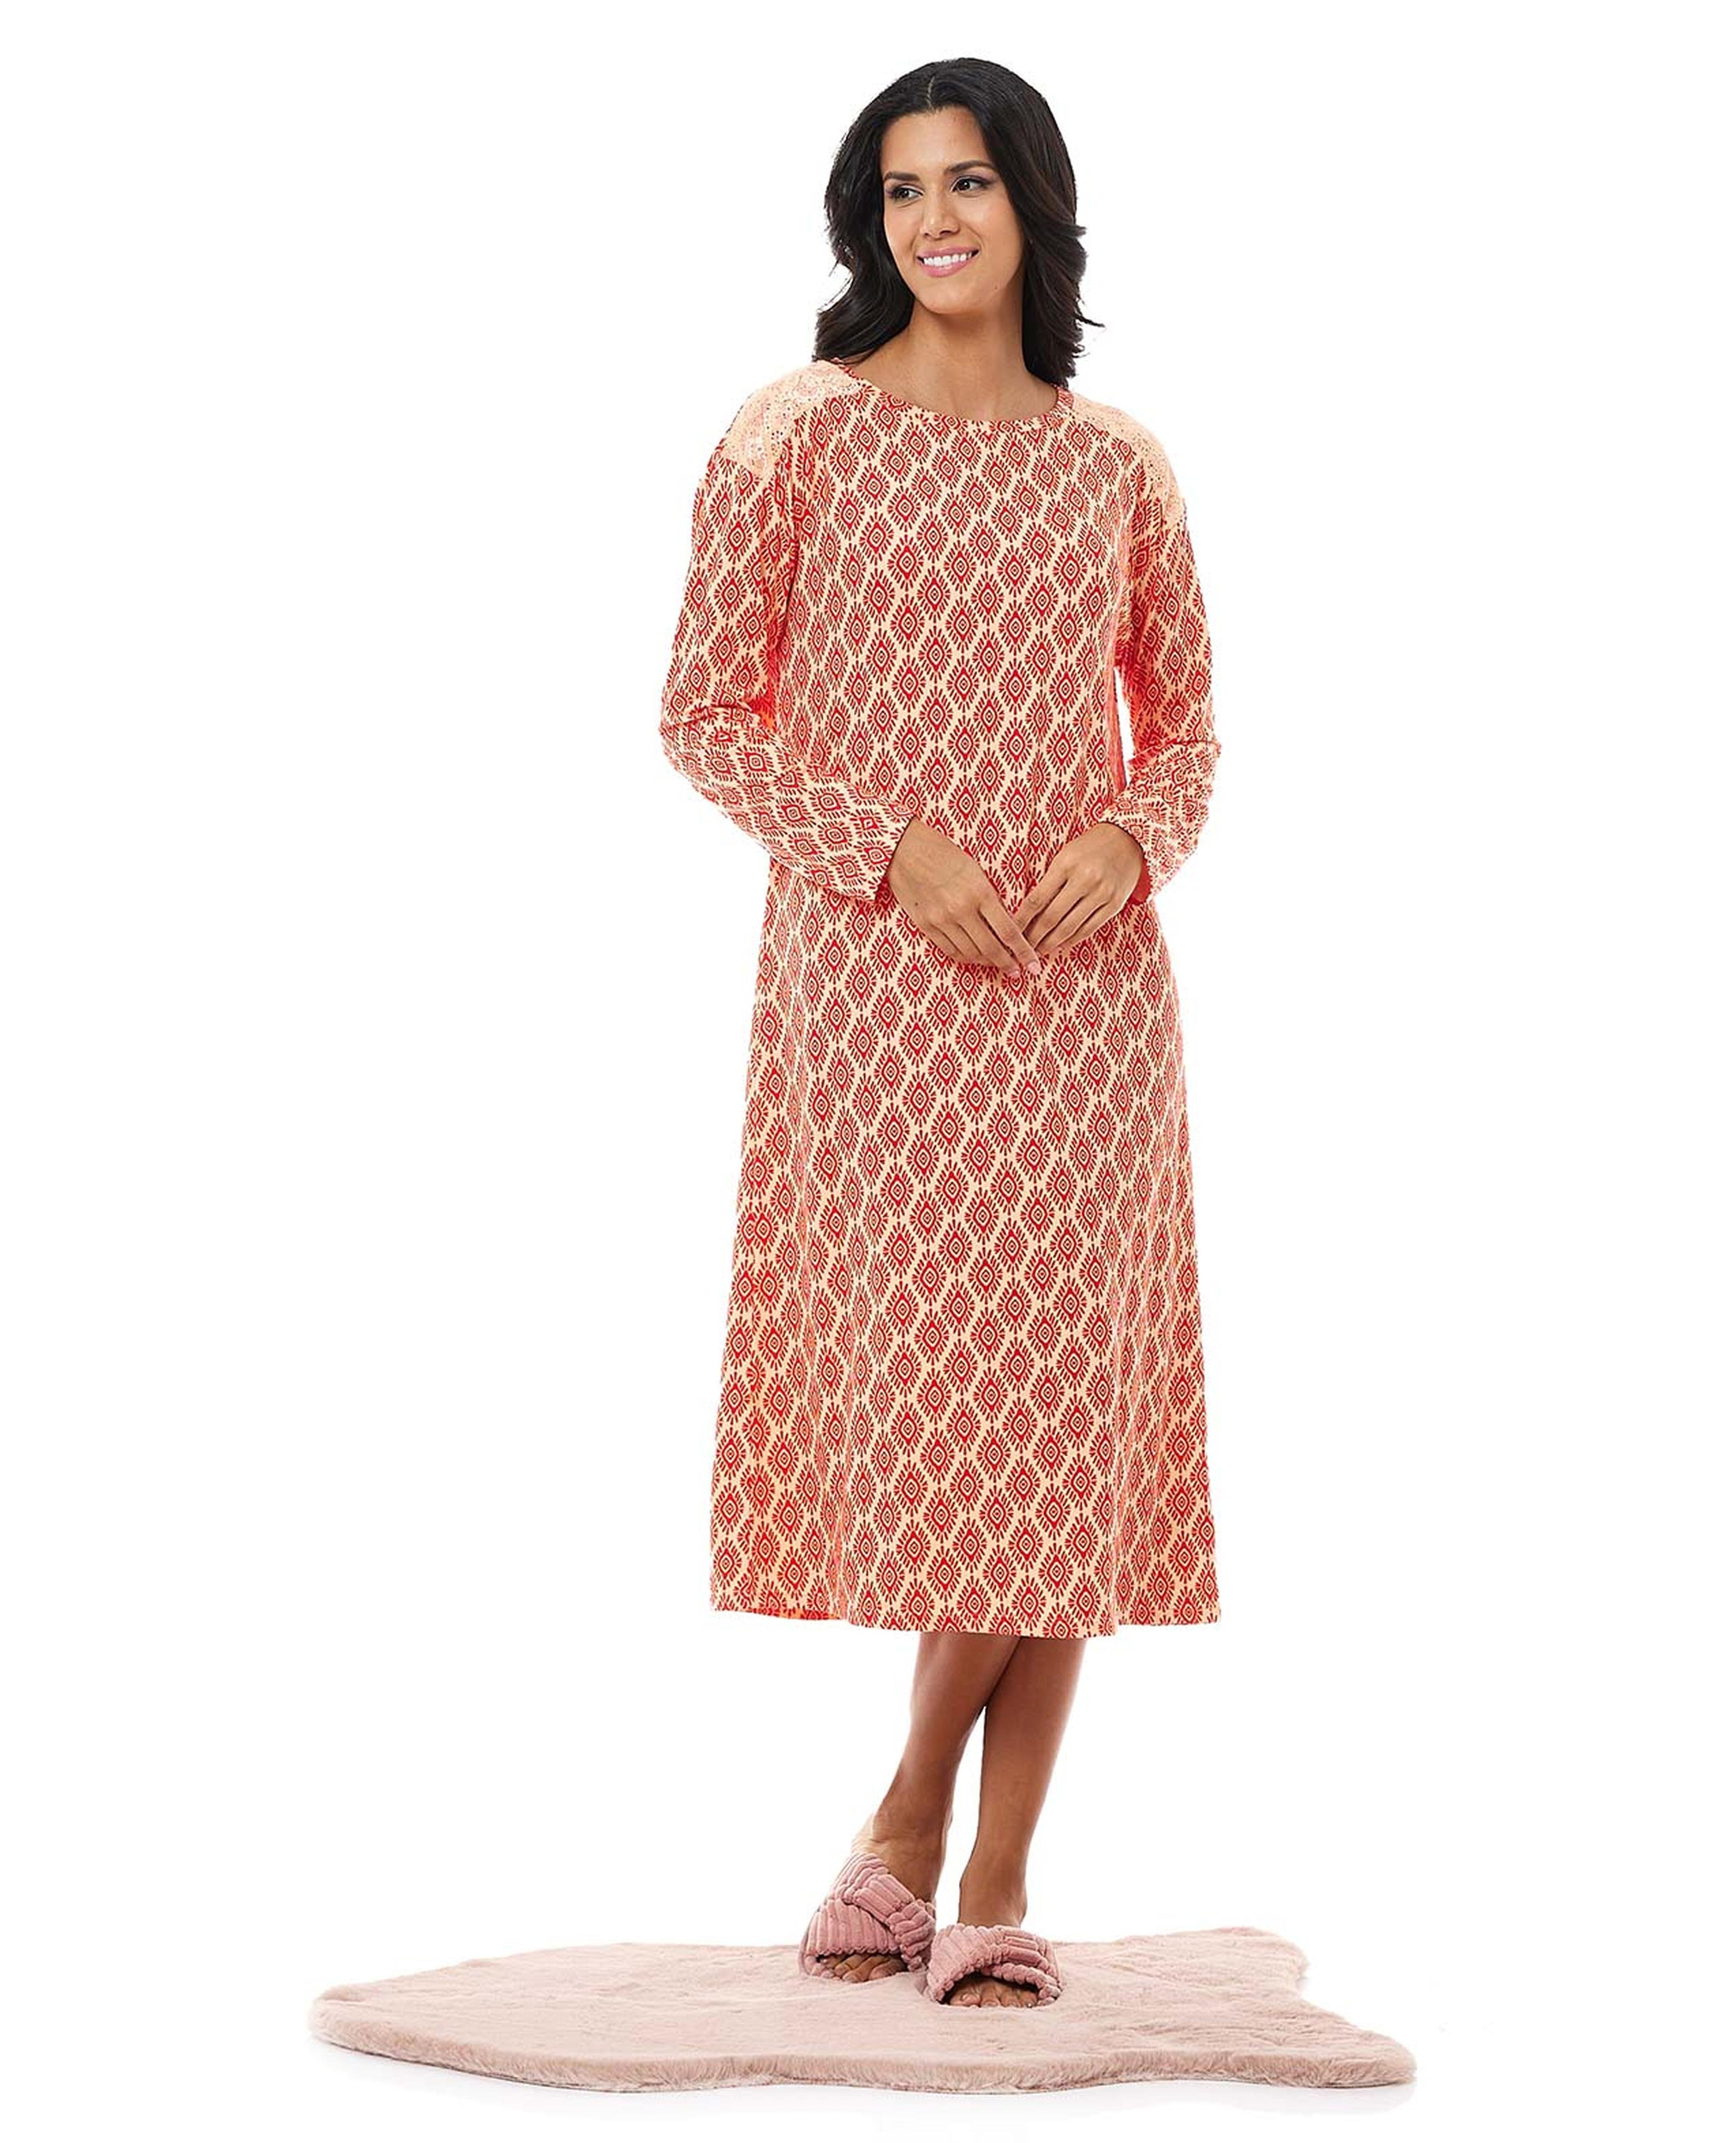 Patterned Nightgown